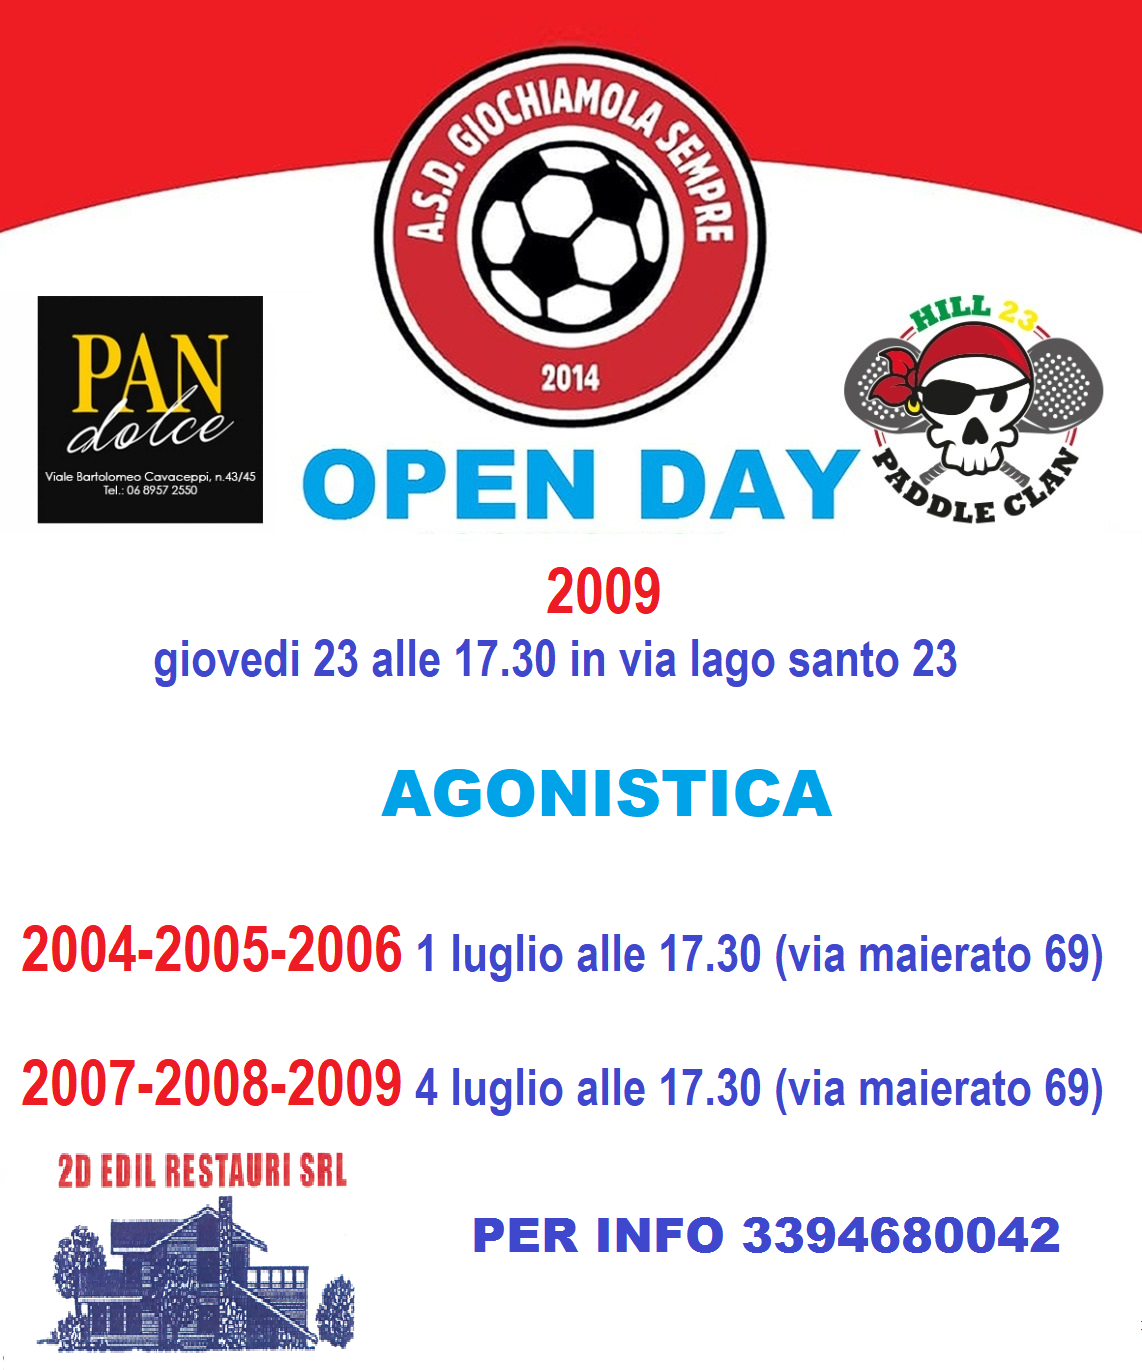  OPENDAY AGONISTICA